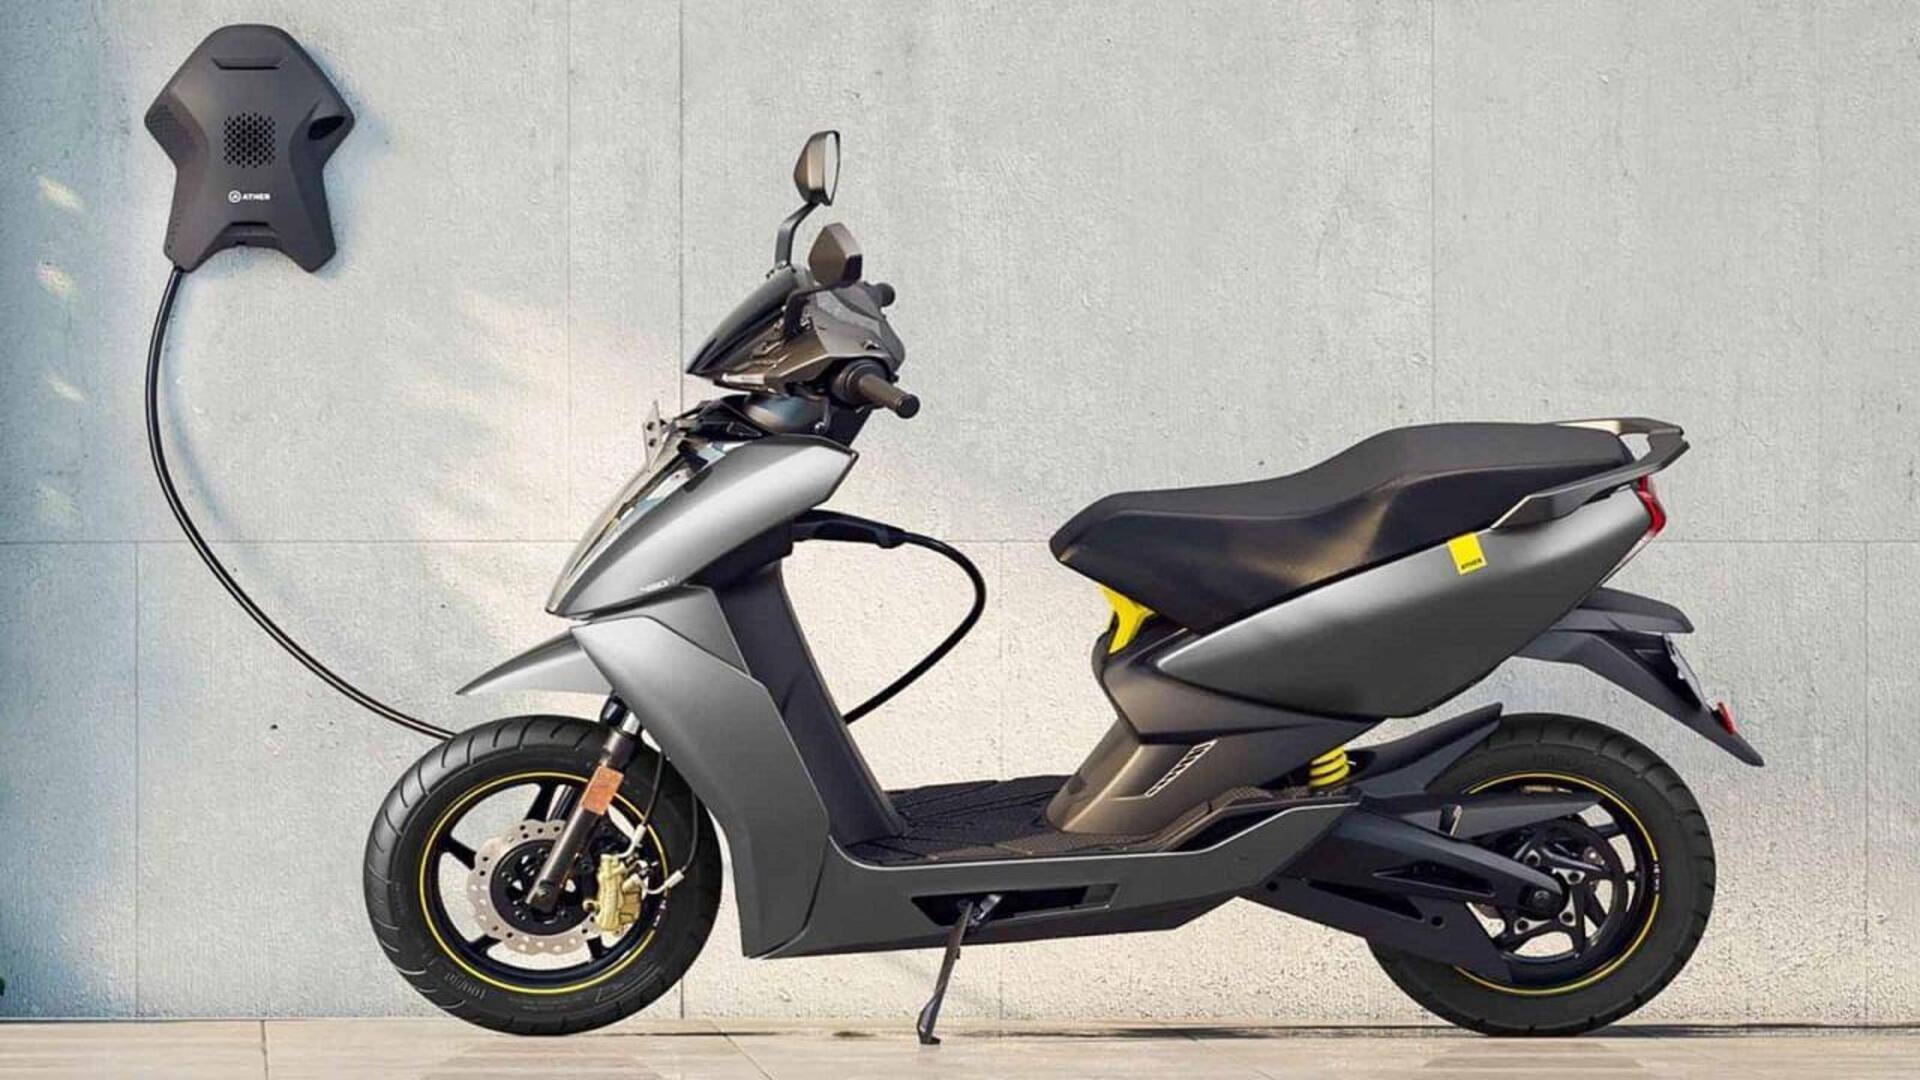 FAME subsidy removal on electric two-wheelers under consideration: Expected impact